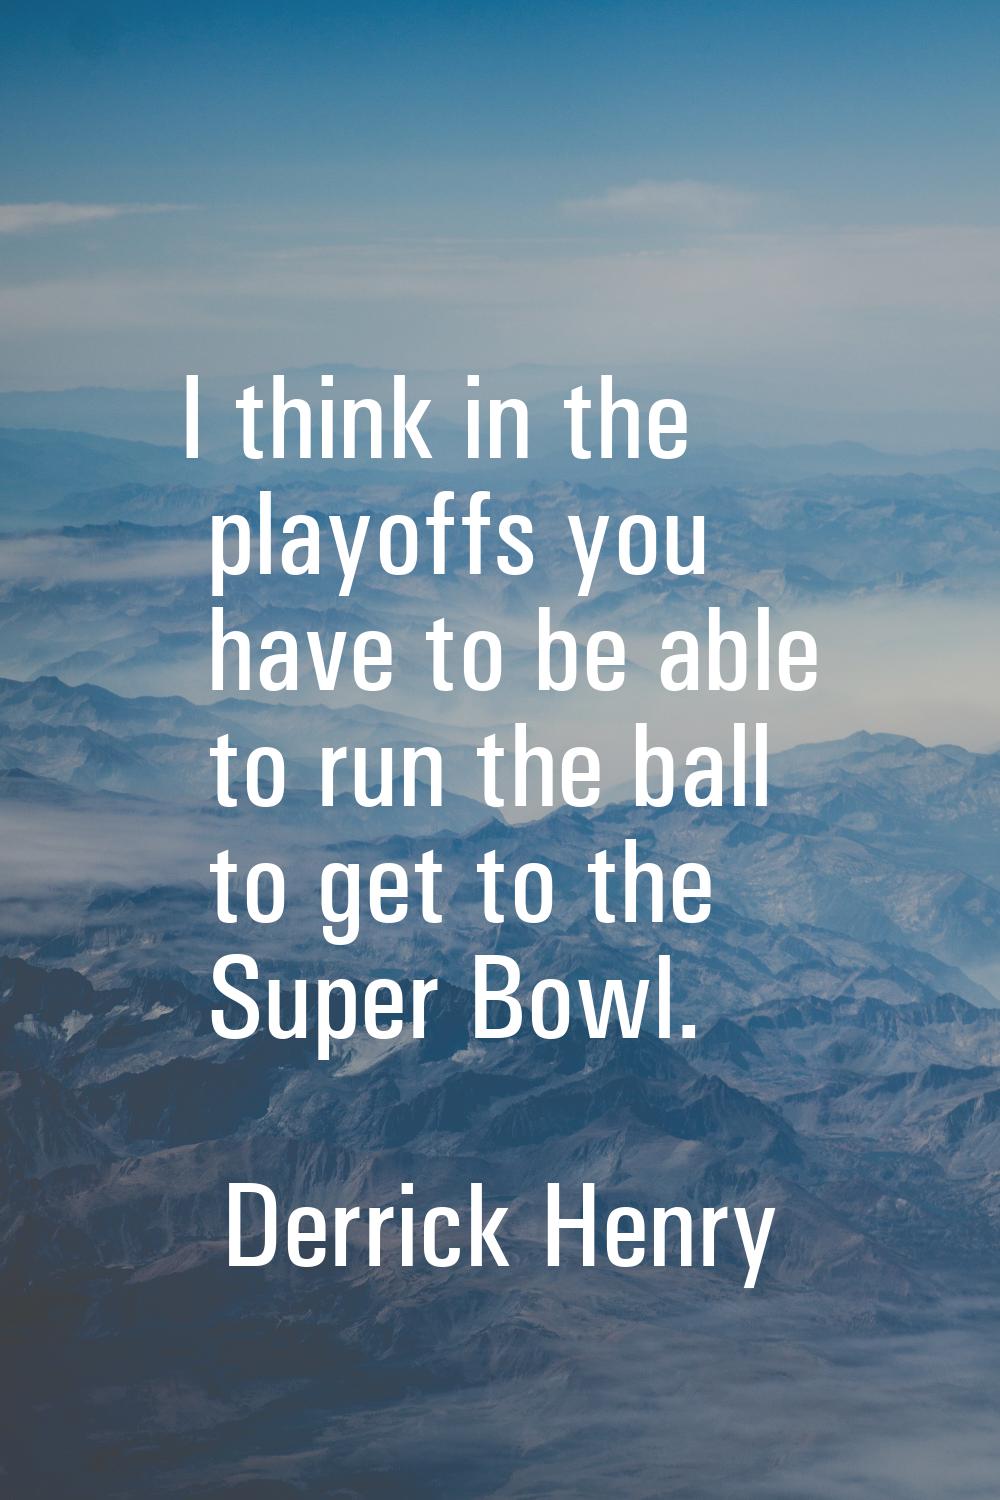 I think in the playoffs you have to be able to run the ball to get to the Super Bowl.